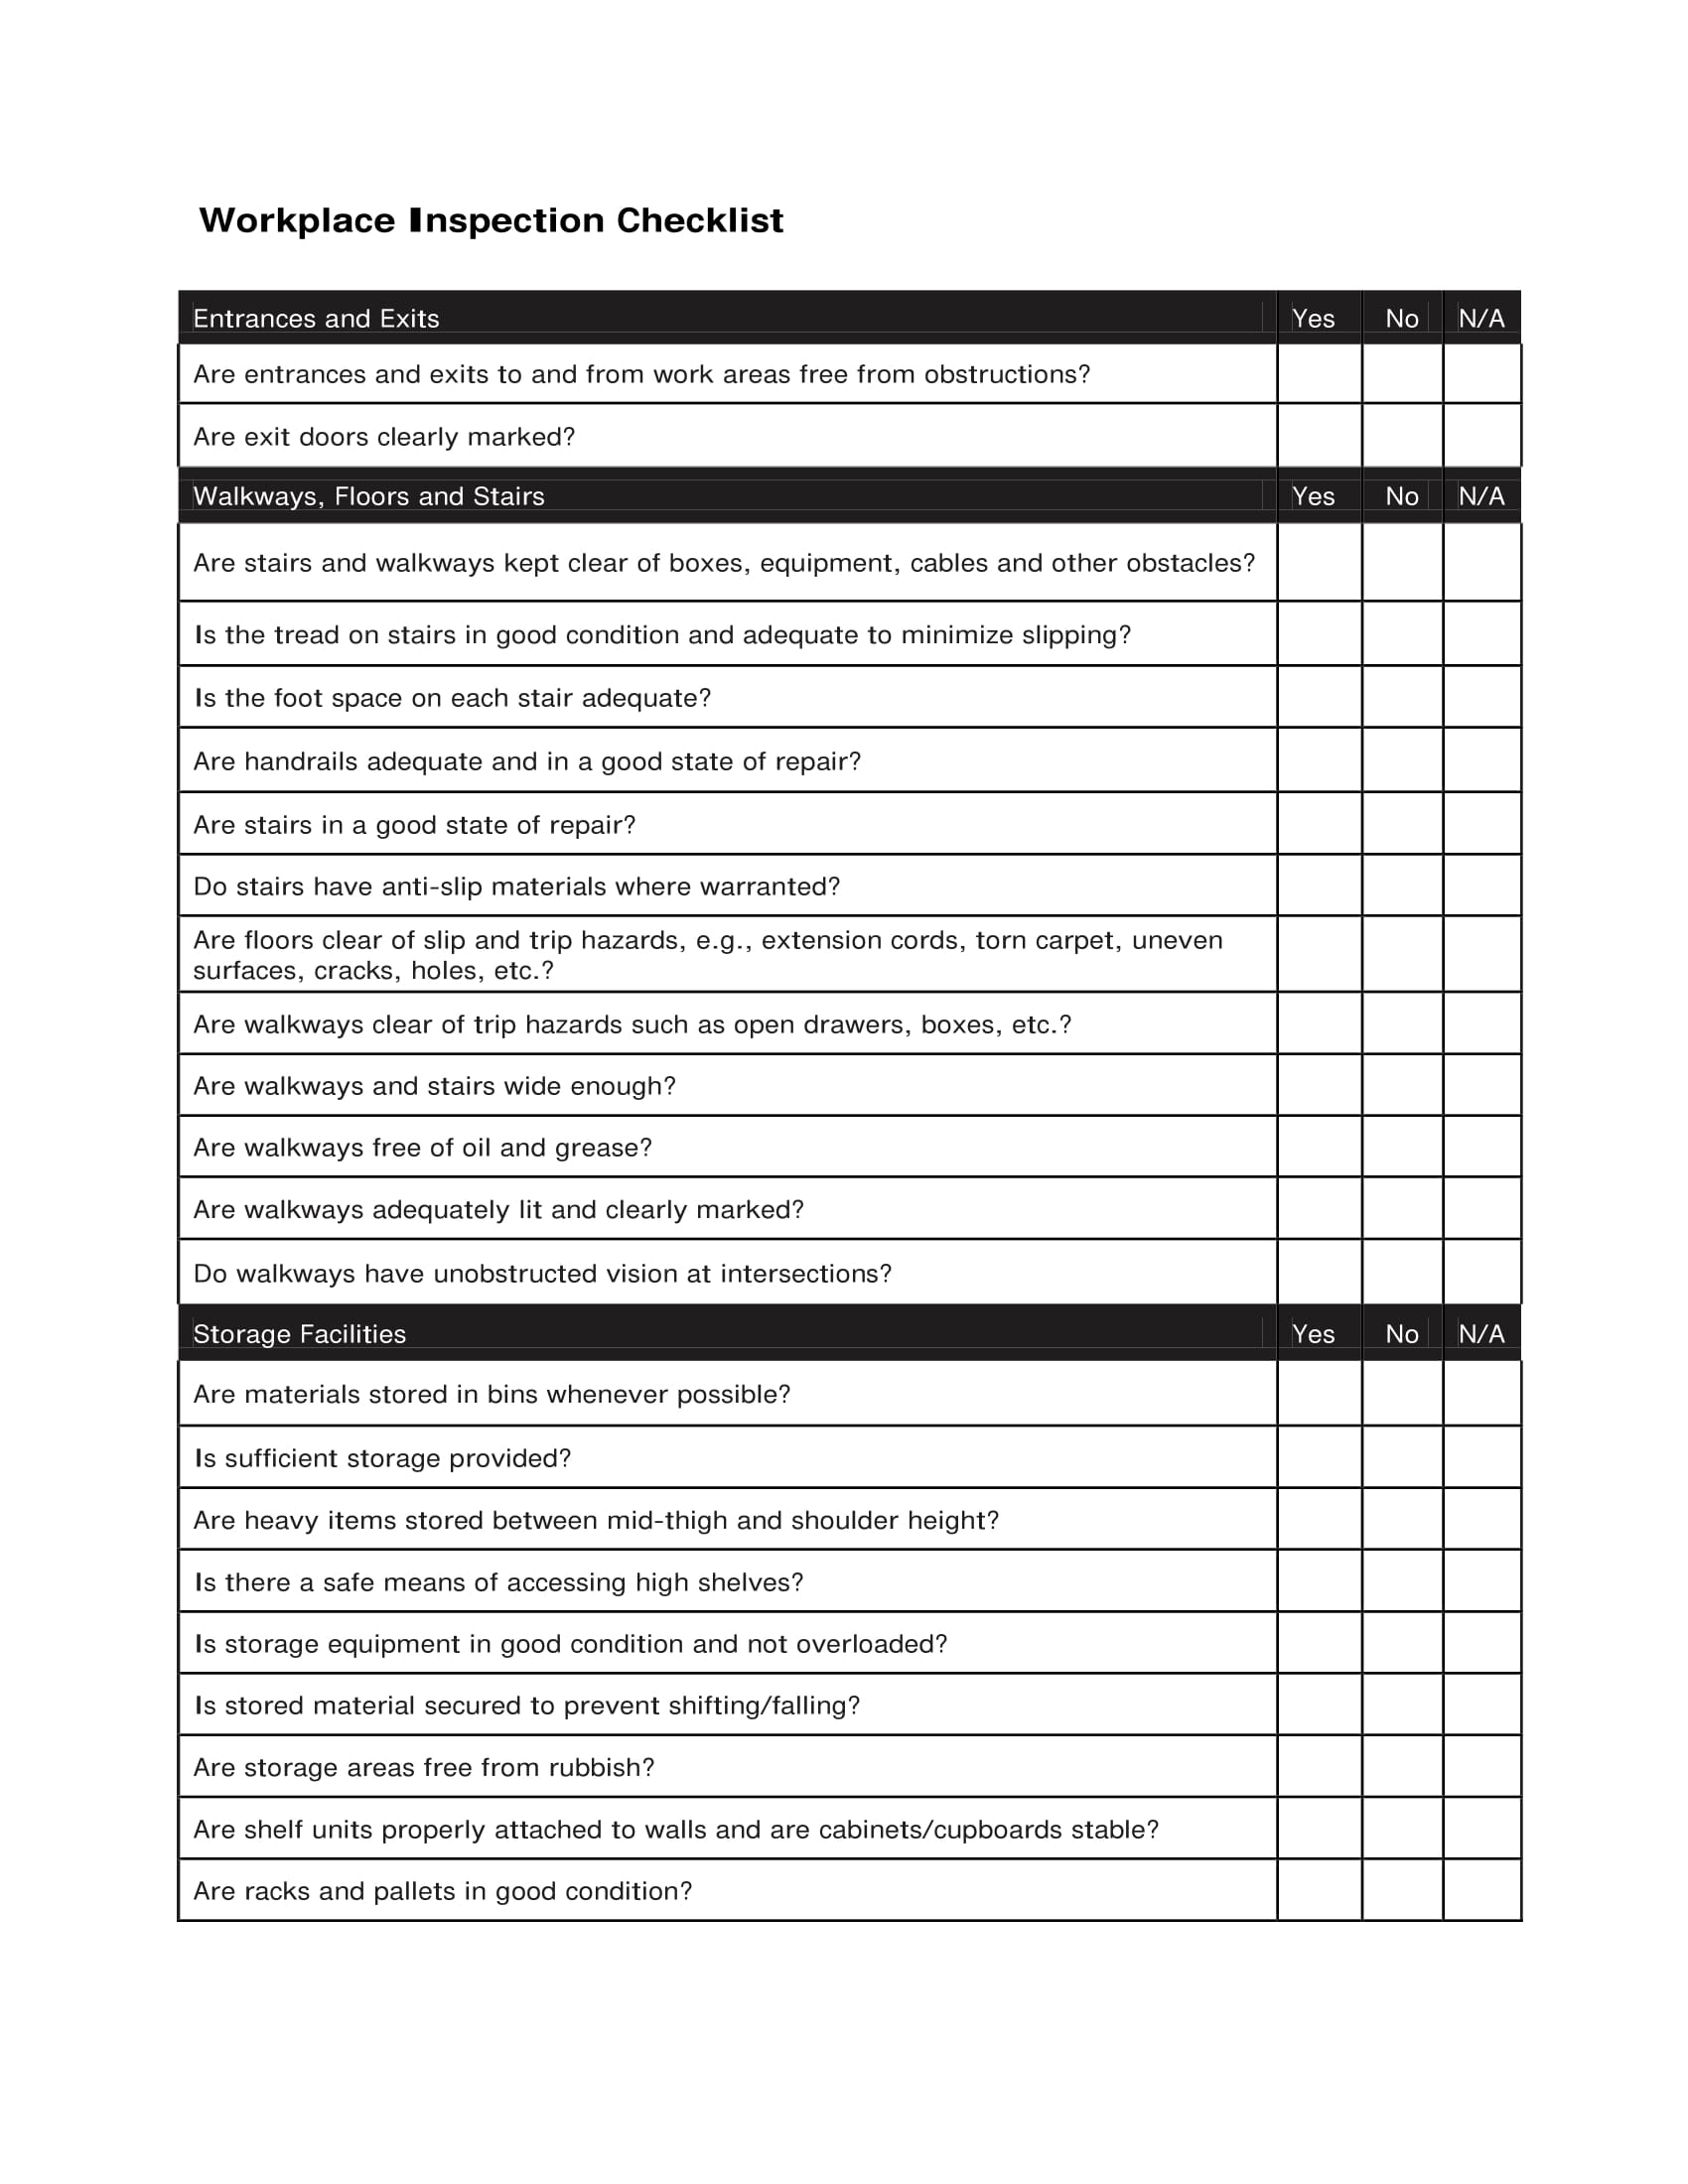 10+ Workplace Inspection Checklist Examples - PDF, Word  Examples With Workplace Safety Inspection Checklist Template For Workplace Safety Inspection Checklist Template